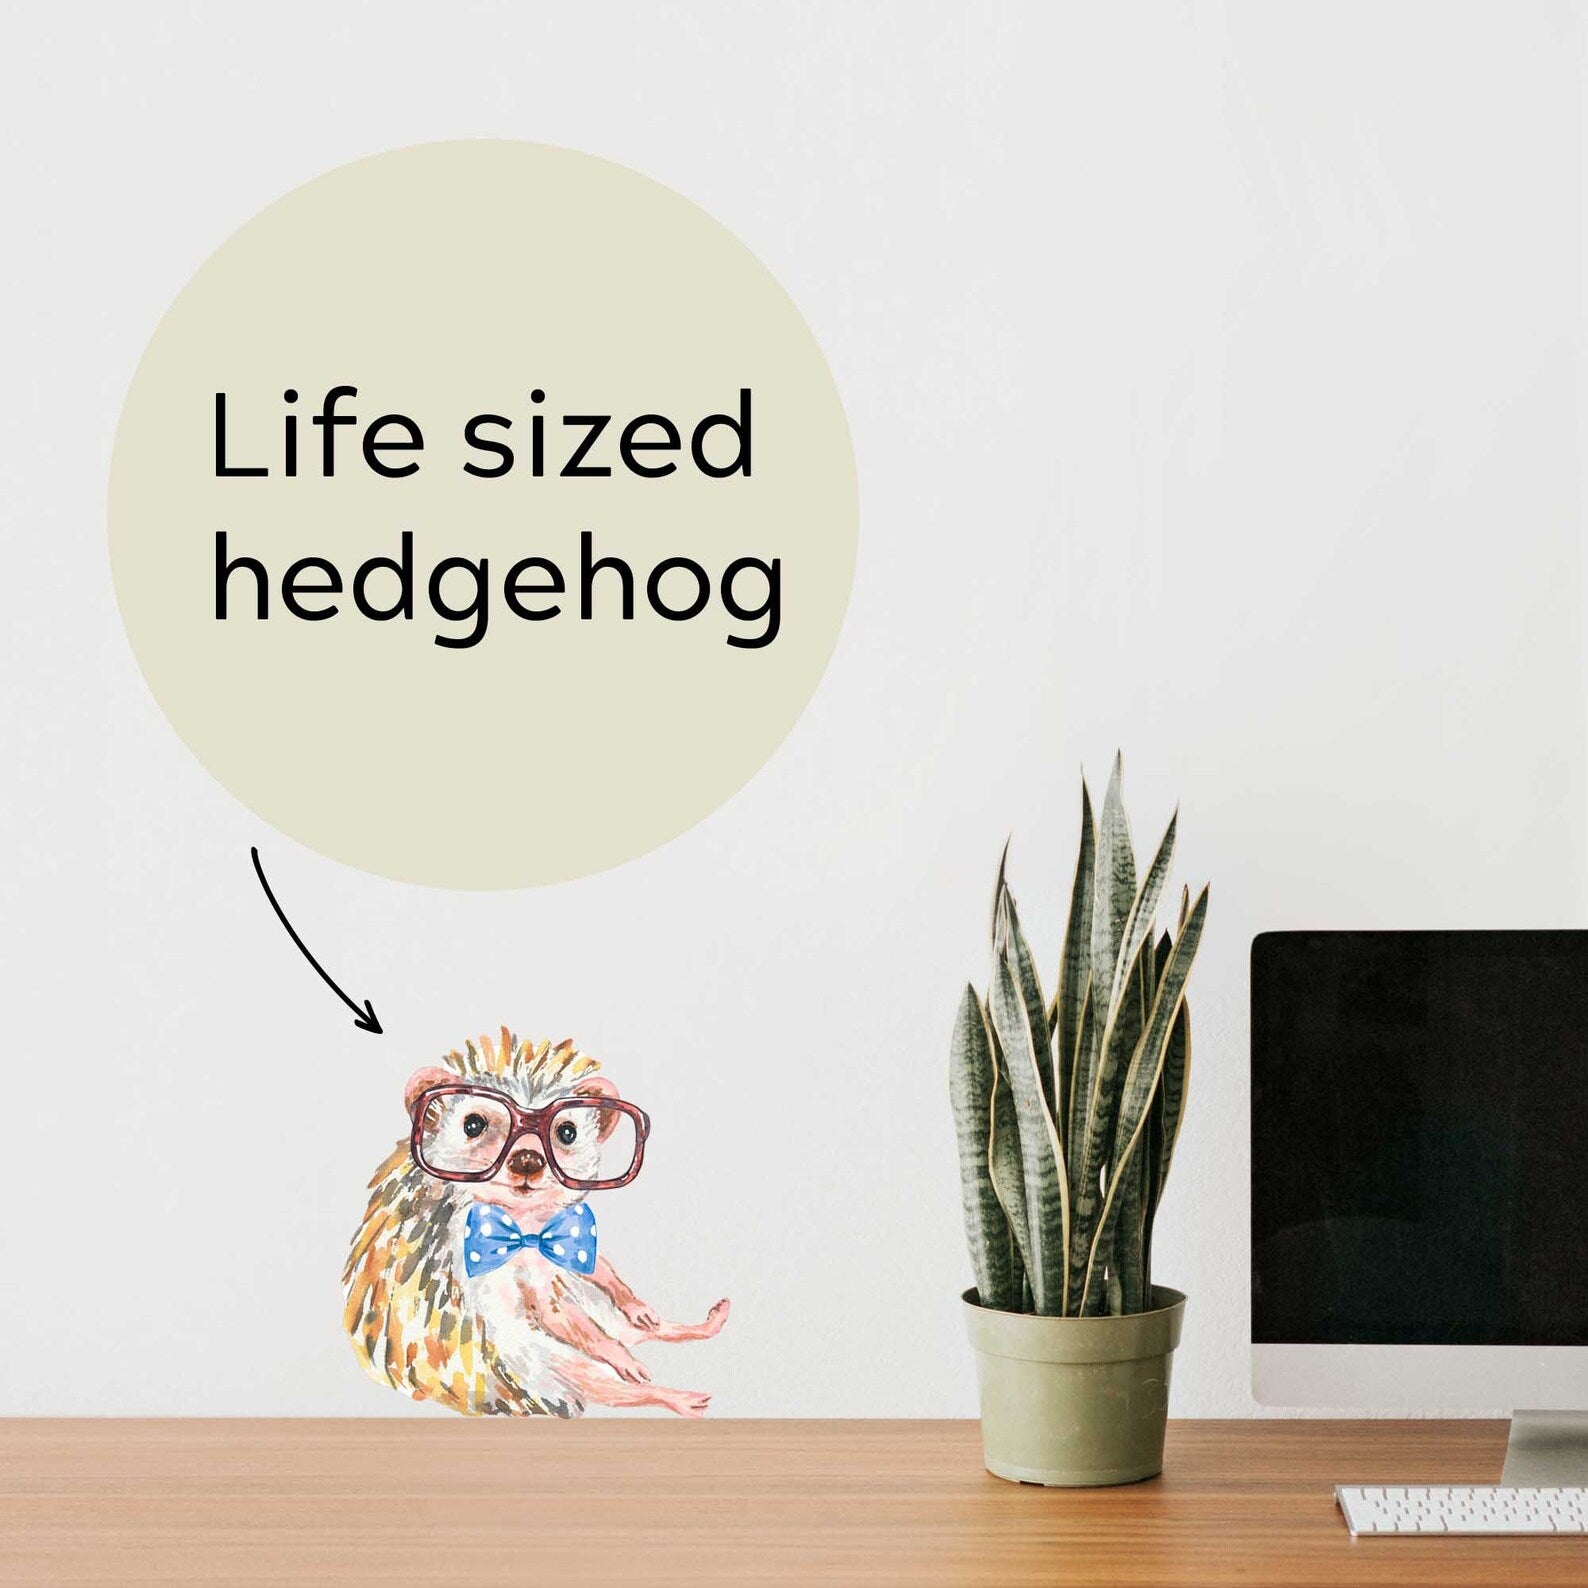 Die-cut wall decal featuring a watercolour painting of an adorable hedgehog. Comes with removable accessories